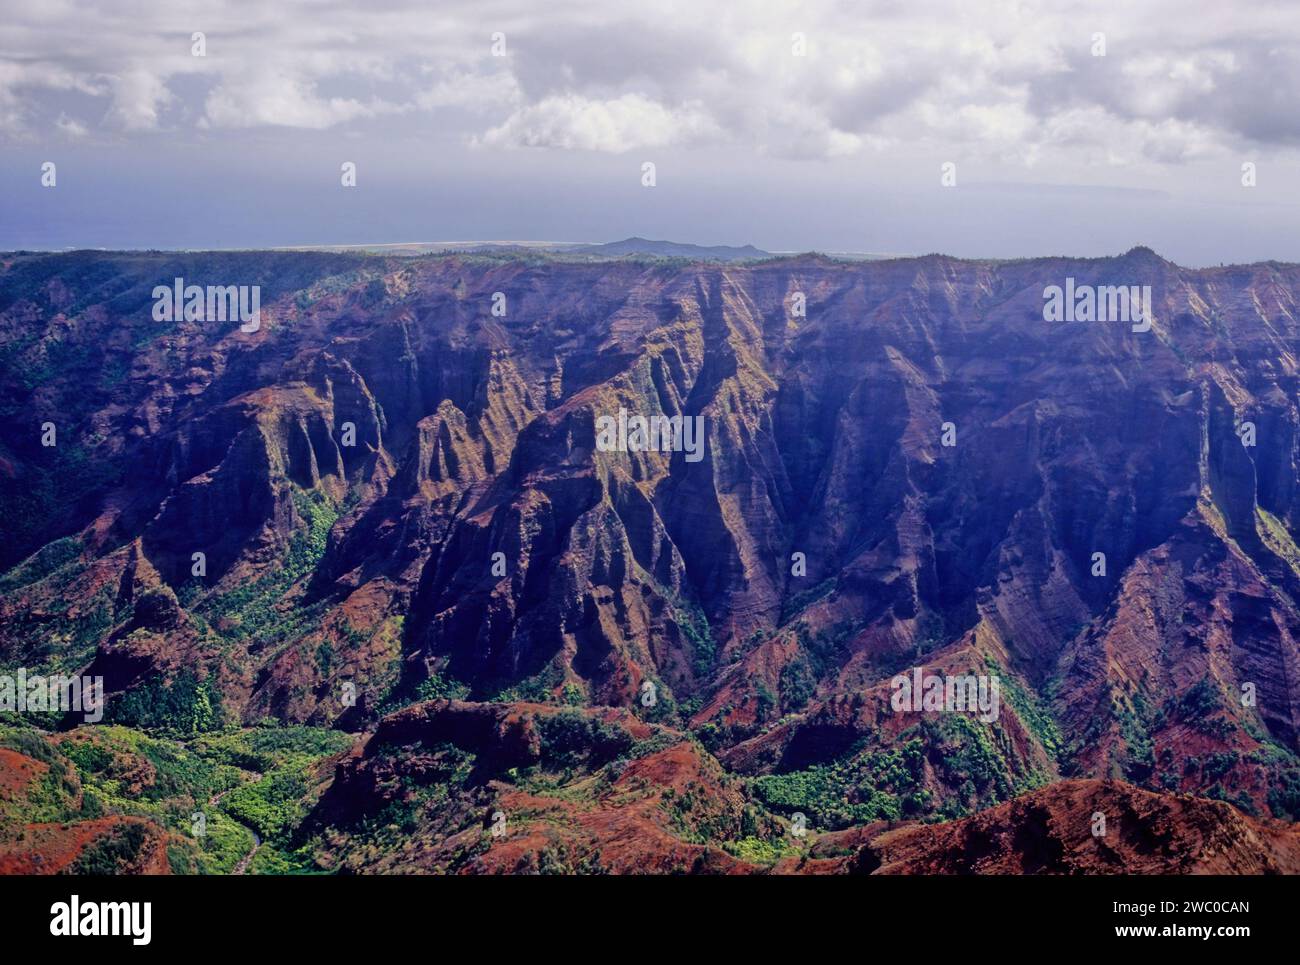 Waimea Canyon, also known as the Grand Canyon of the Pacific, is a large canyon, approximately ten miles (16 km) long and up to 3,000 feet (900 m) dee Stock Photo